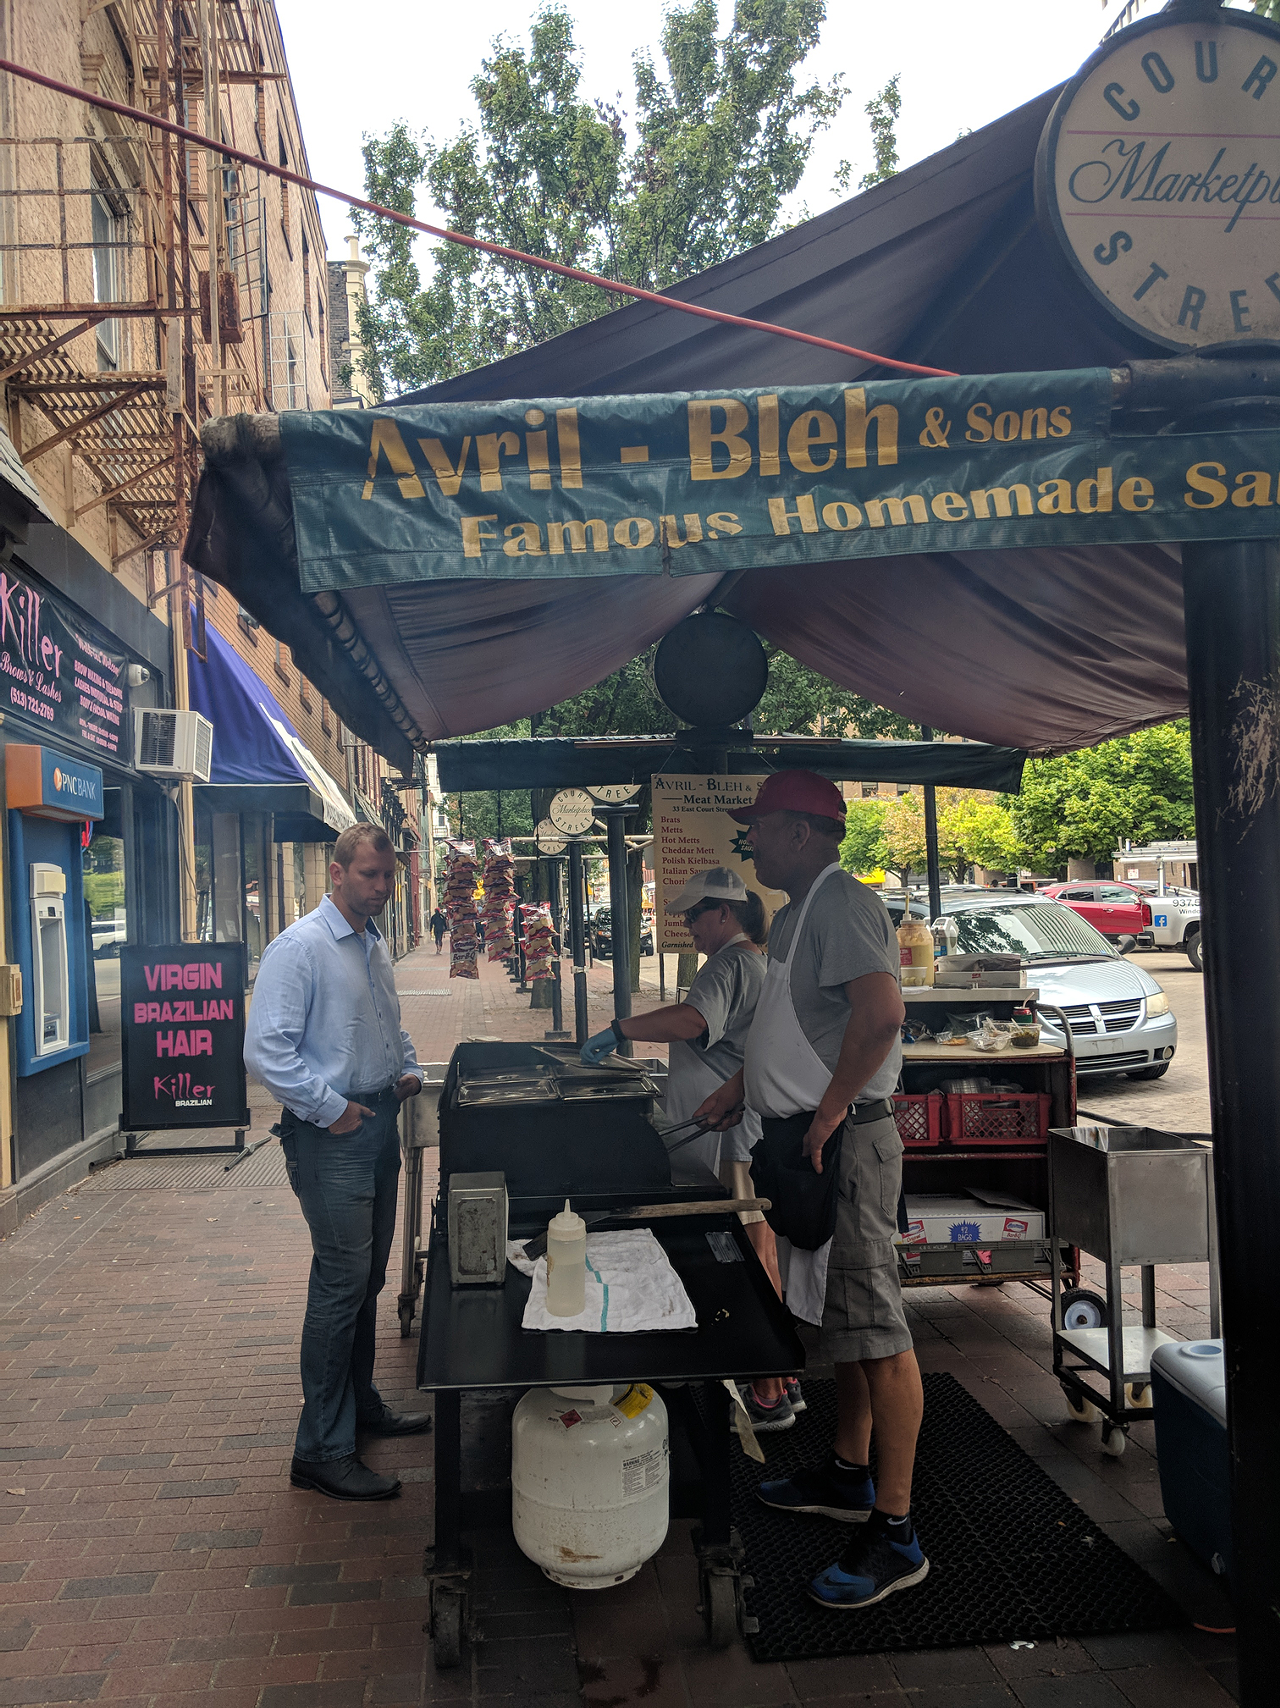 Avril-Bleh & Sons (33 E Court St., Downtown): The meat market's summertime sausage and hot dog stand is located on the sidewalk outside of their downtown storefront. The grill is open 11 a.m.-2 p.m. Tuesday-Friday through the end of summer.